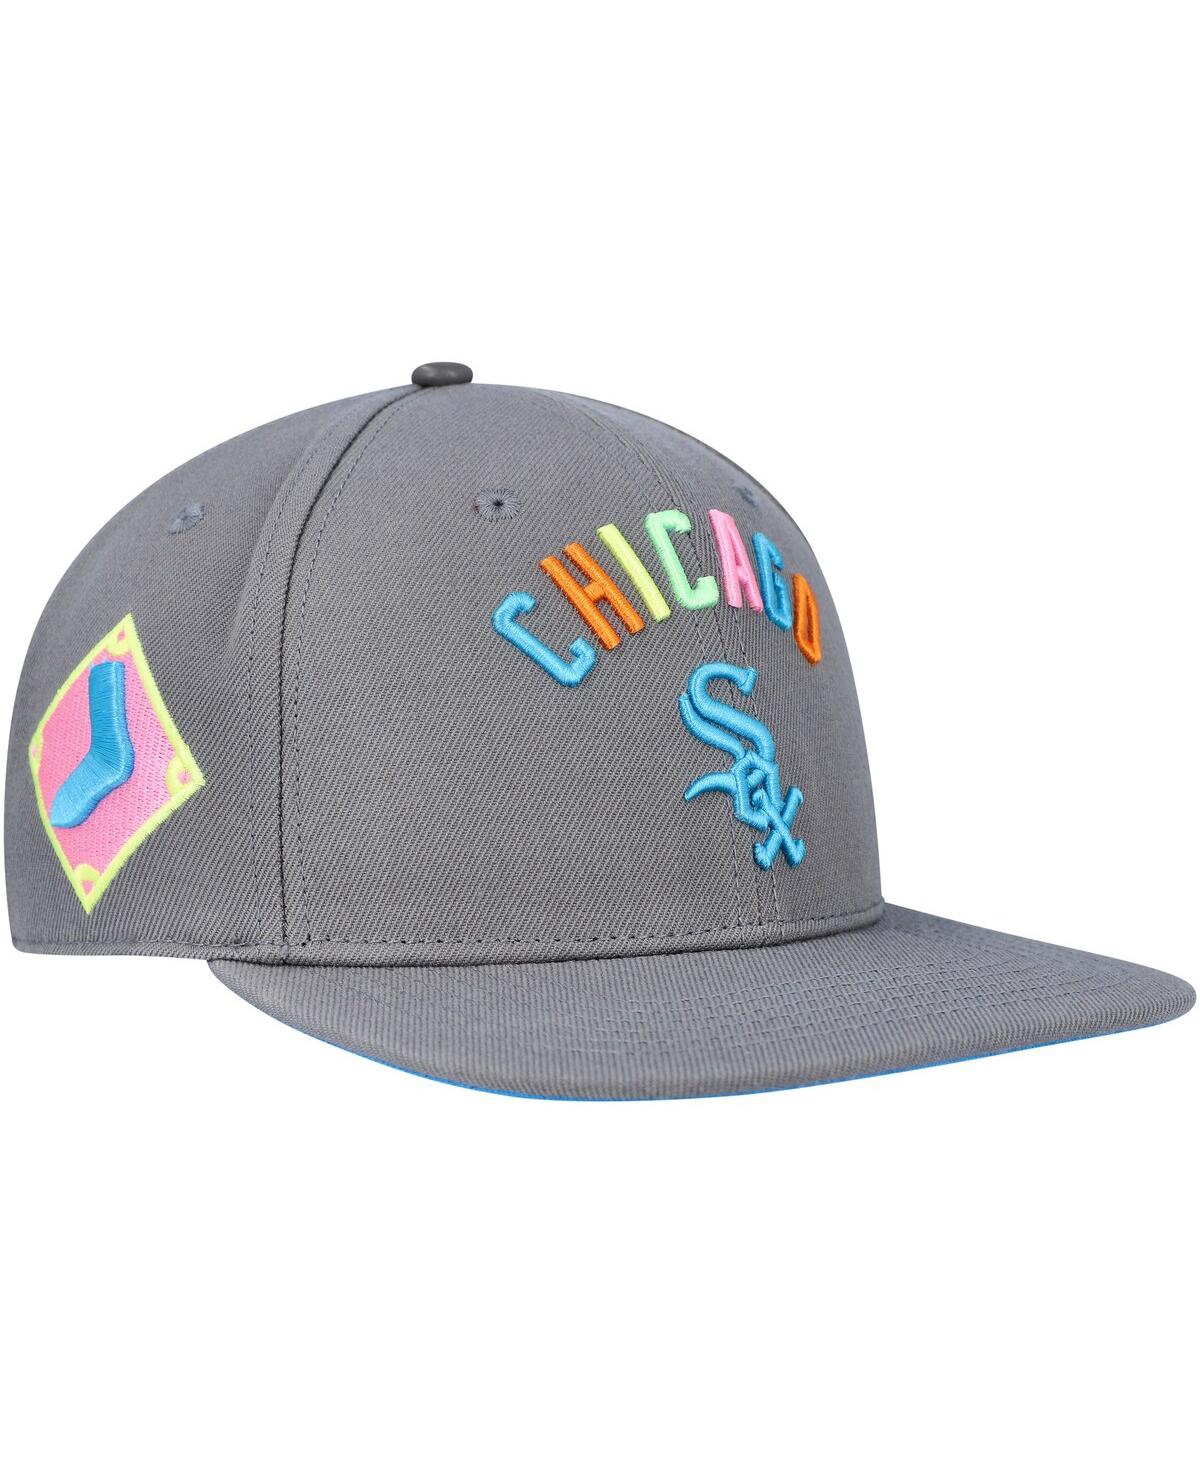 Shop Pro Standard Men's  Gray Chicago White Sox Washed Neon Snapback Hat